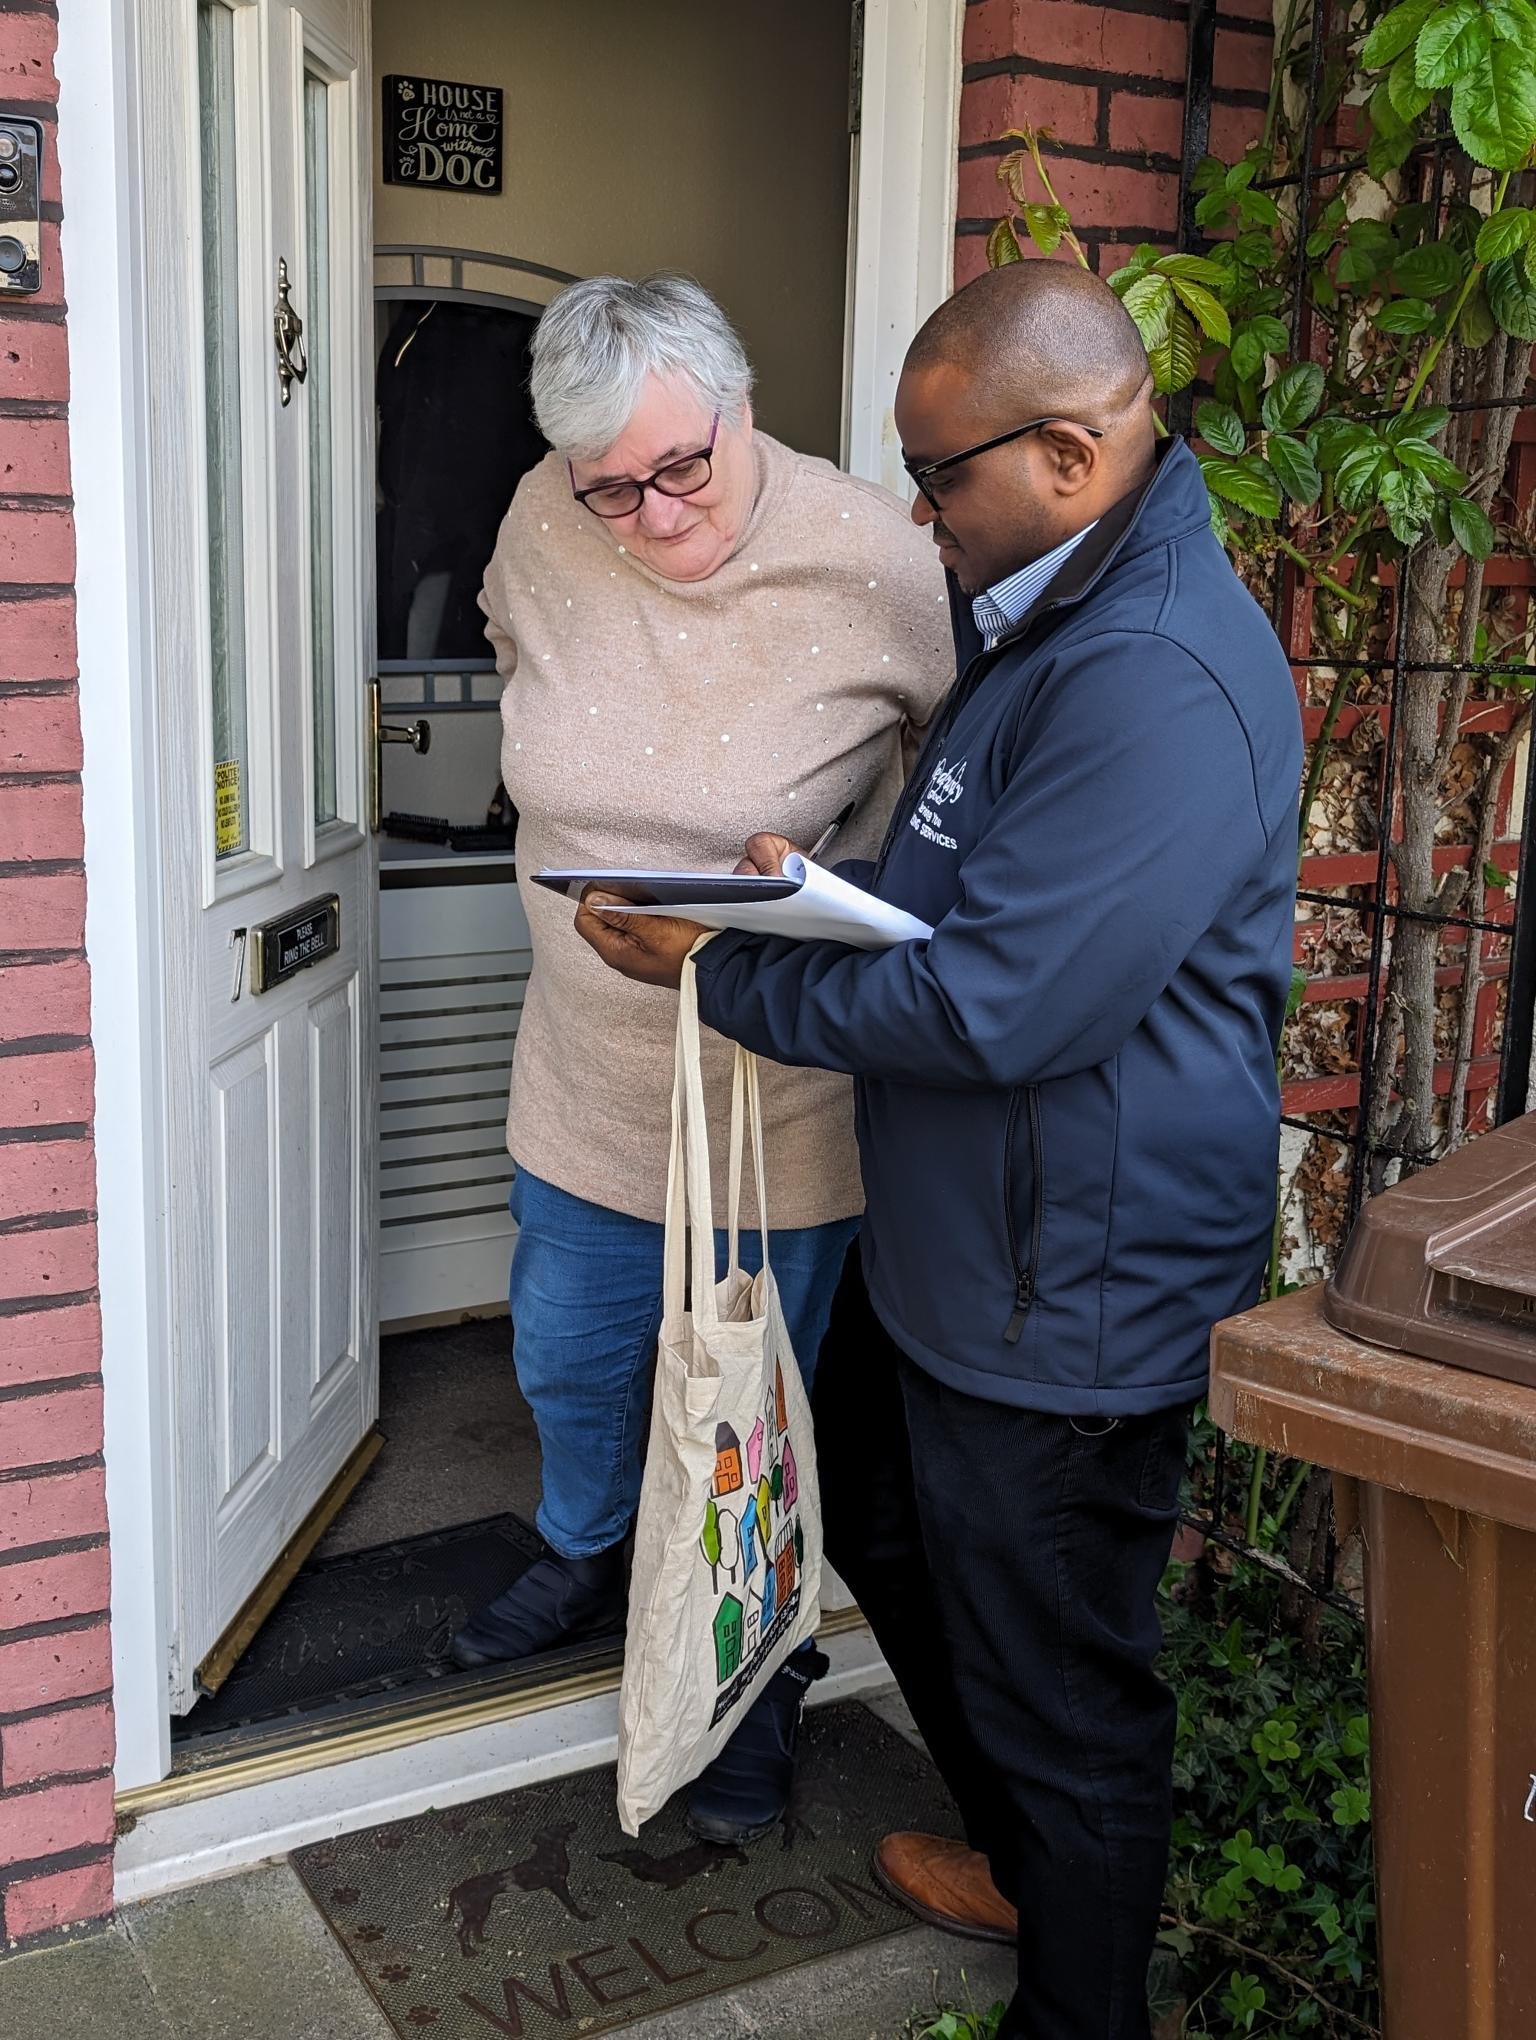 A man is stood talking to a woman in front of her house with the door open. He is holding a clipboard in his hand, and she is looking down at it as well.